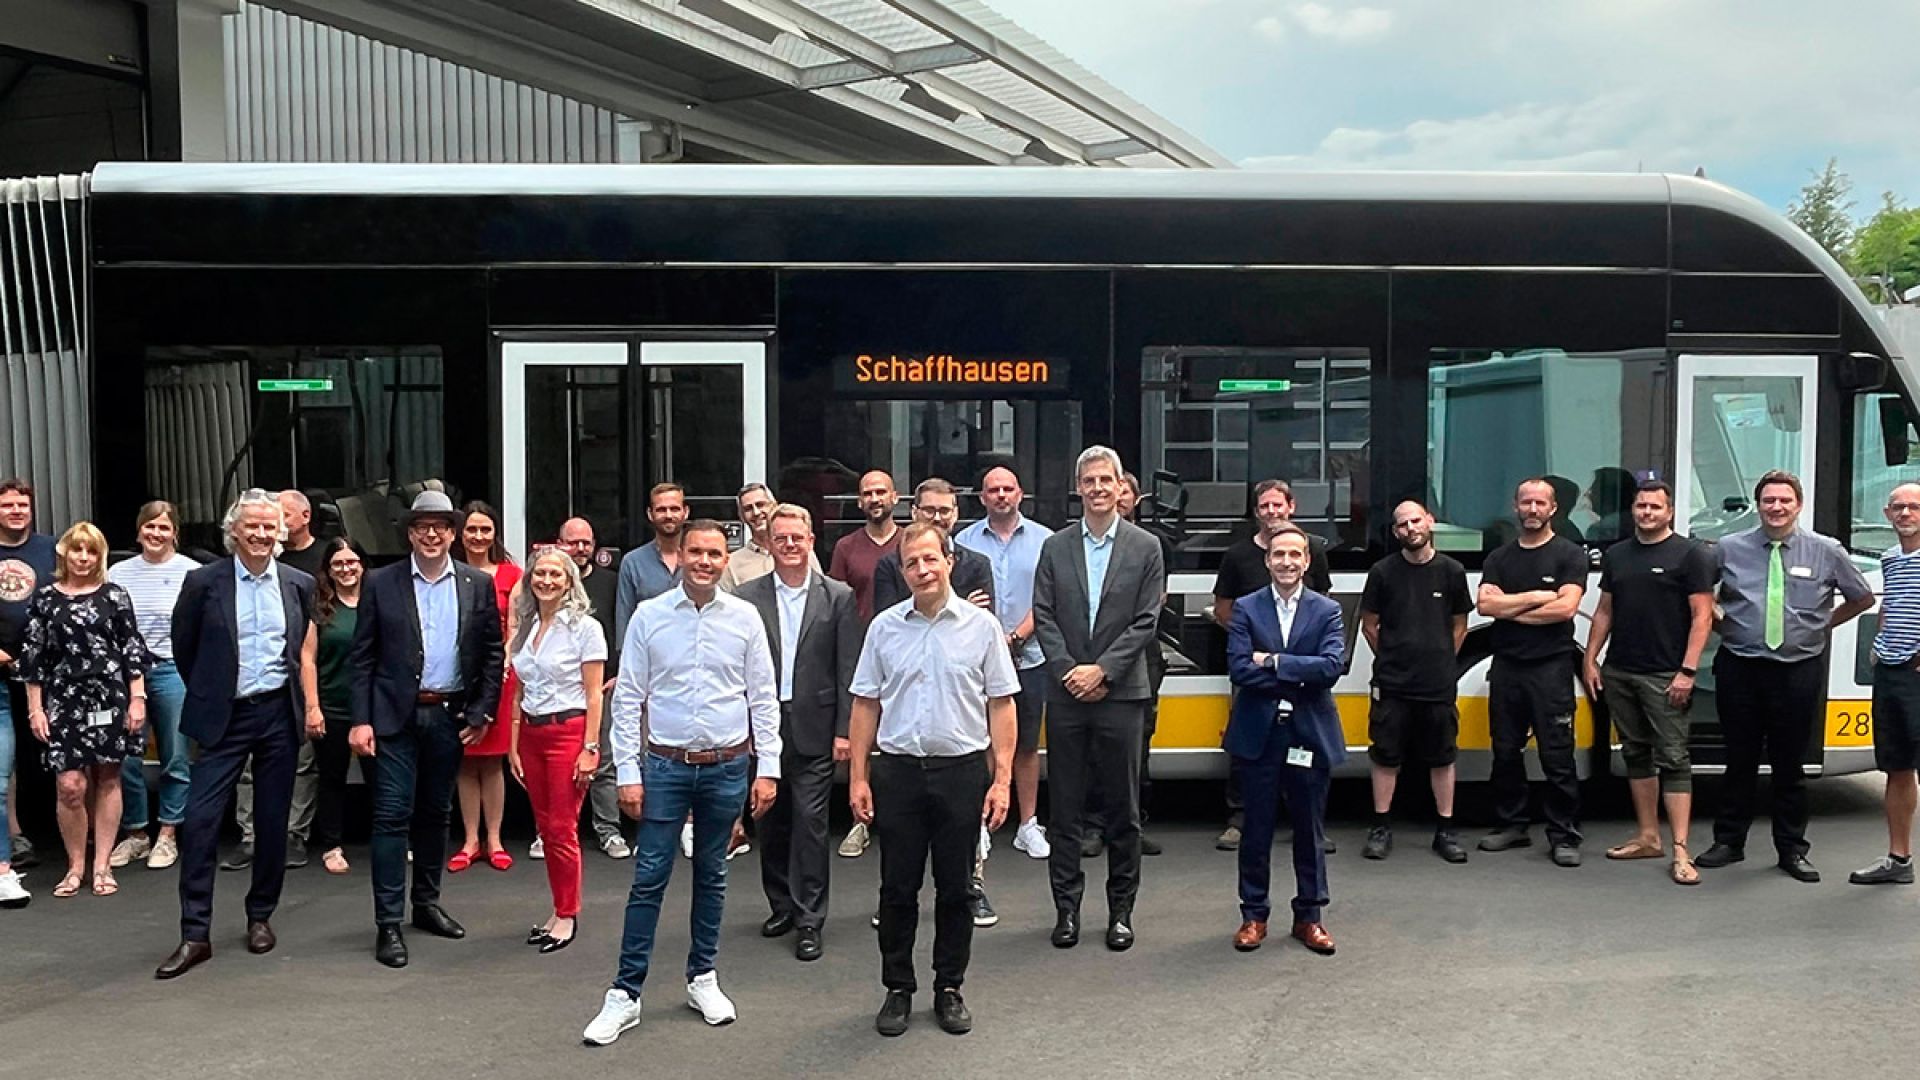 Irizar electric buses have performed more than 750,000 km and made 60,000 ultra-fast charges in the Swiss city of Schaffhausen